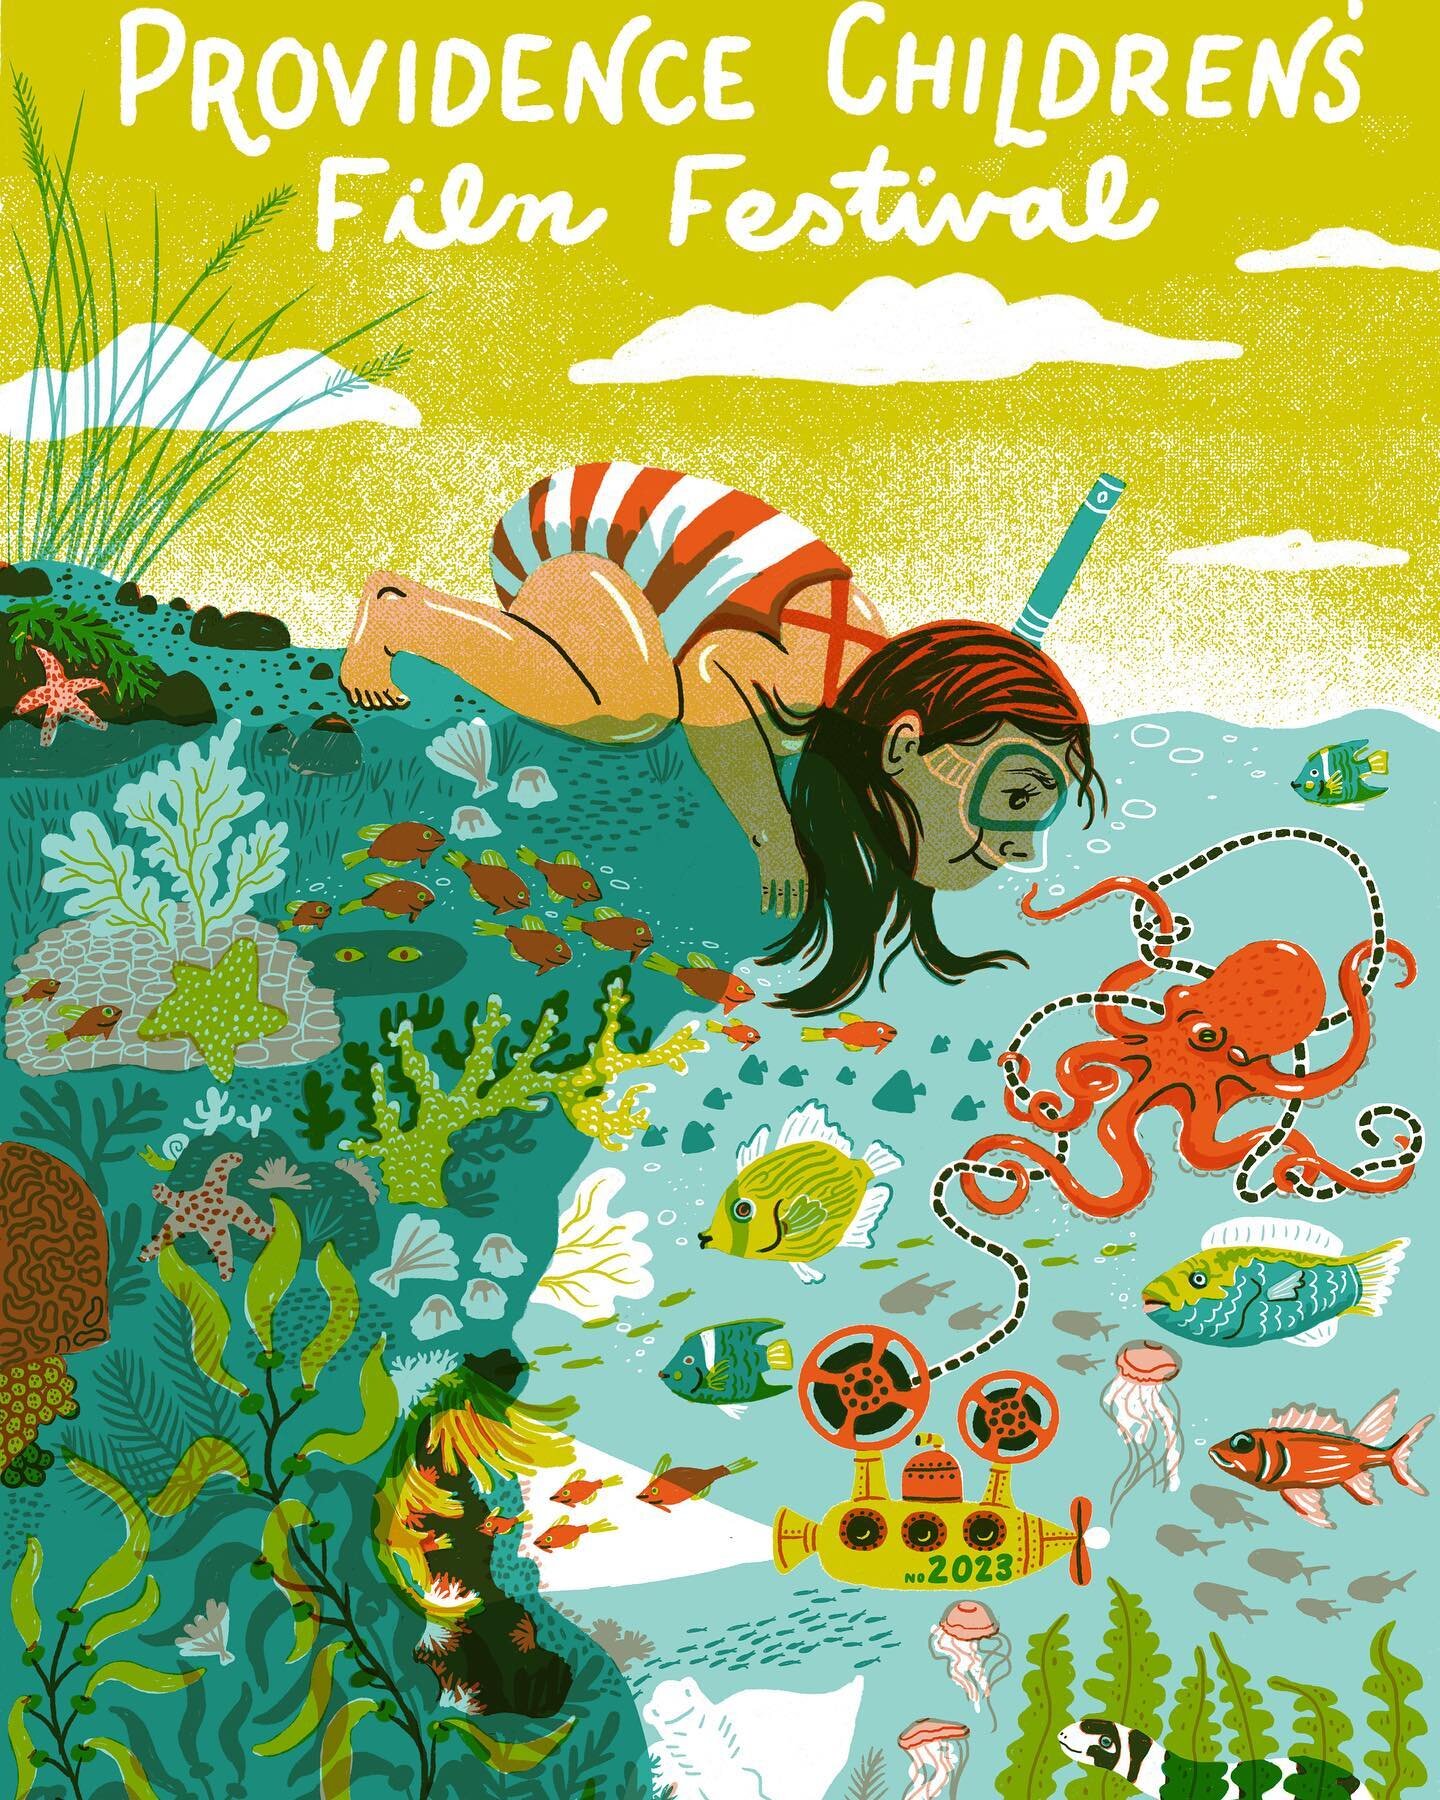 Tonight is opening night of the Providence Children&rsquo;s Film Festival! 🎉🎥 I had the pleasure of teaming up with @pvdfilmfestival and @mszim on this year&rsquo;s festival poster! I really wanted to capture the sense of discovery of the festival 